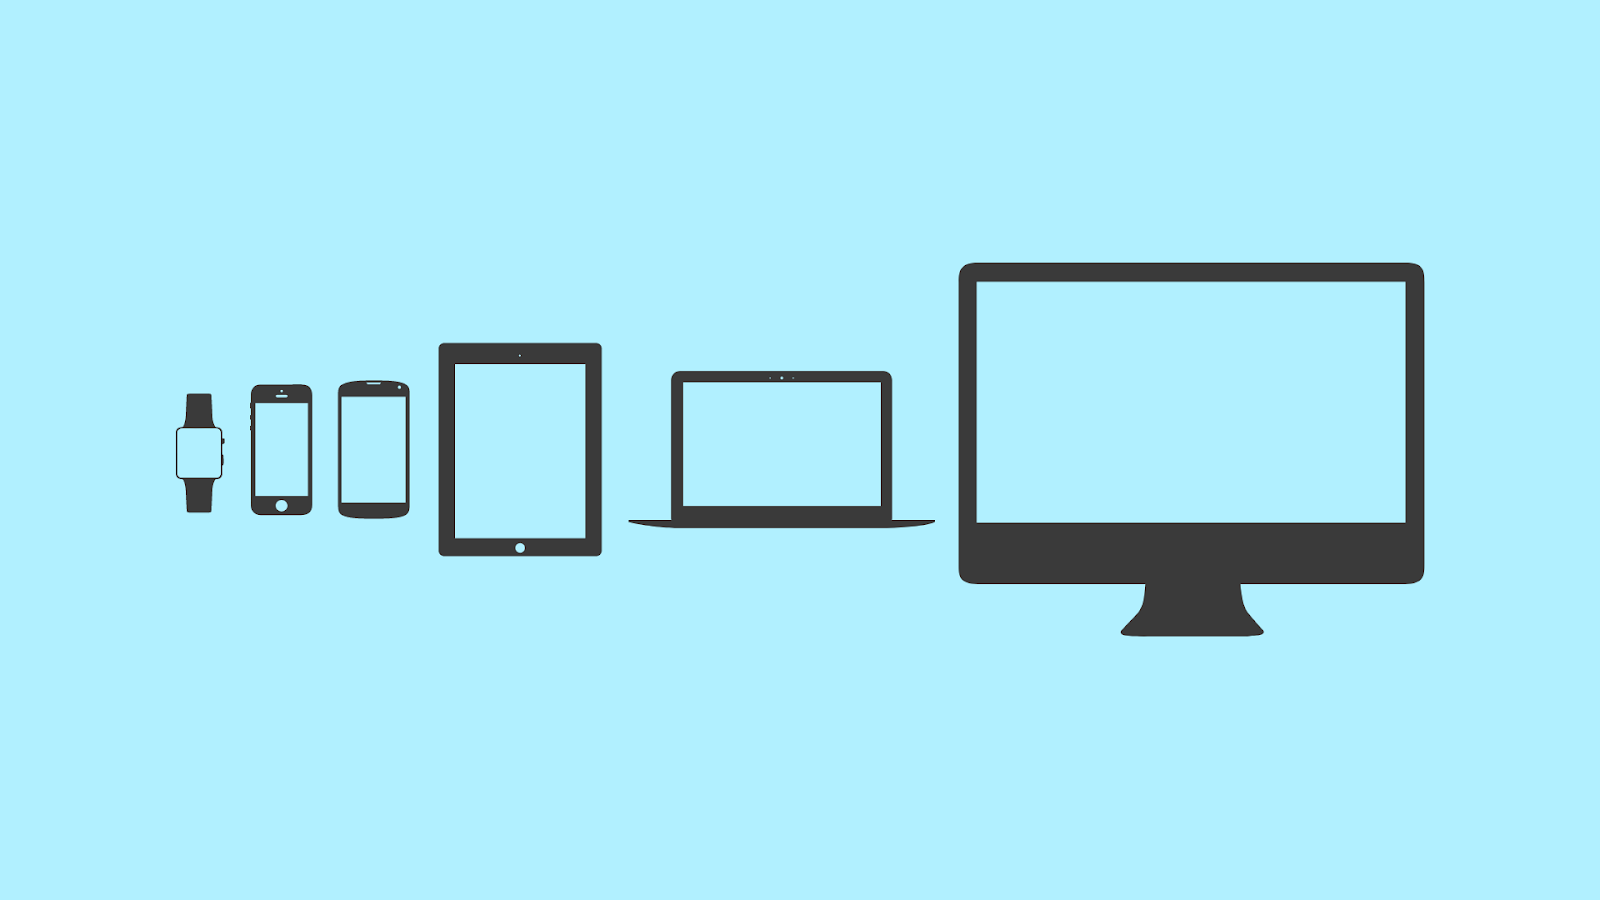 A series of devices and screen sizes. From left to right: smart watch, 2 mobile devices, tablet, laptop, desktop monitor.